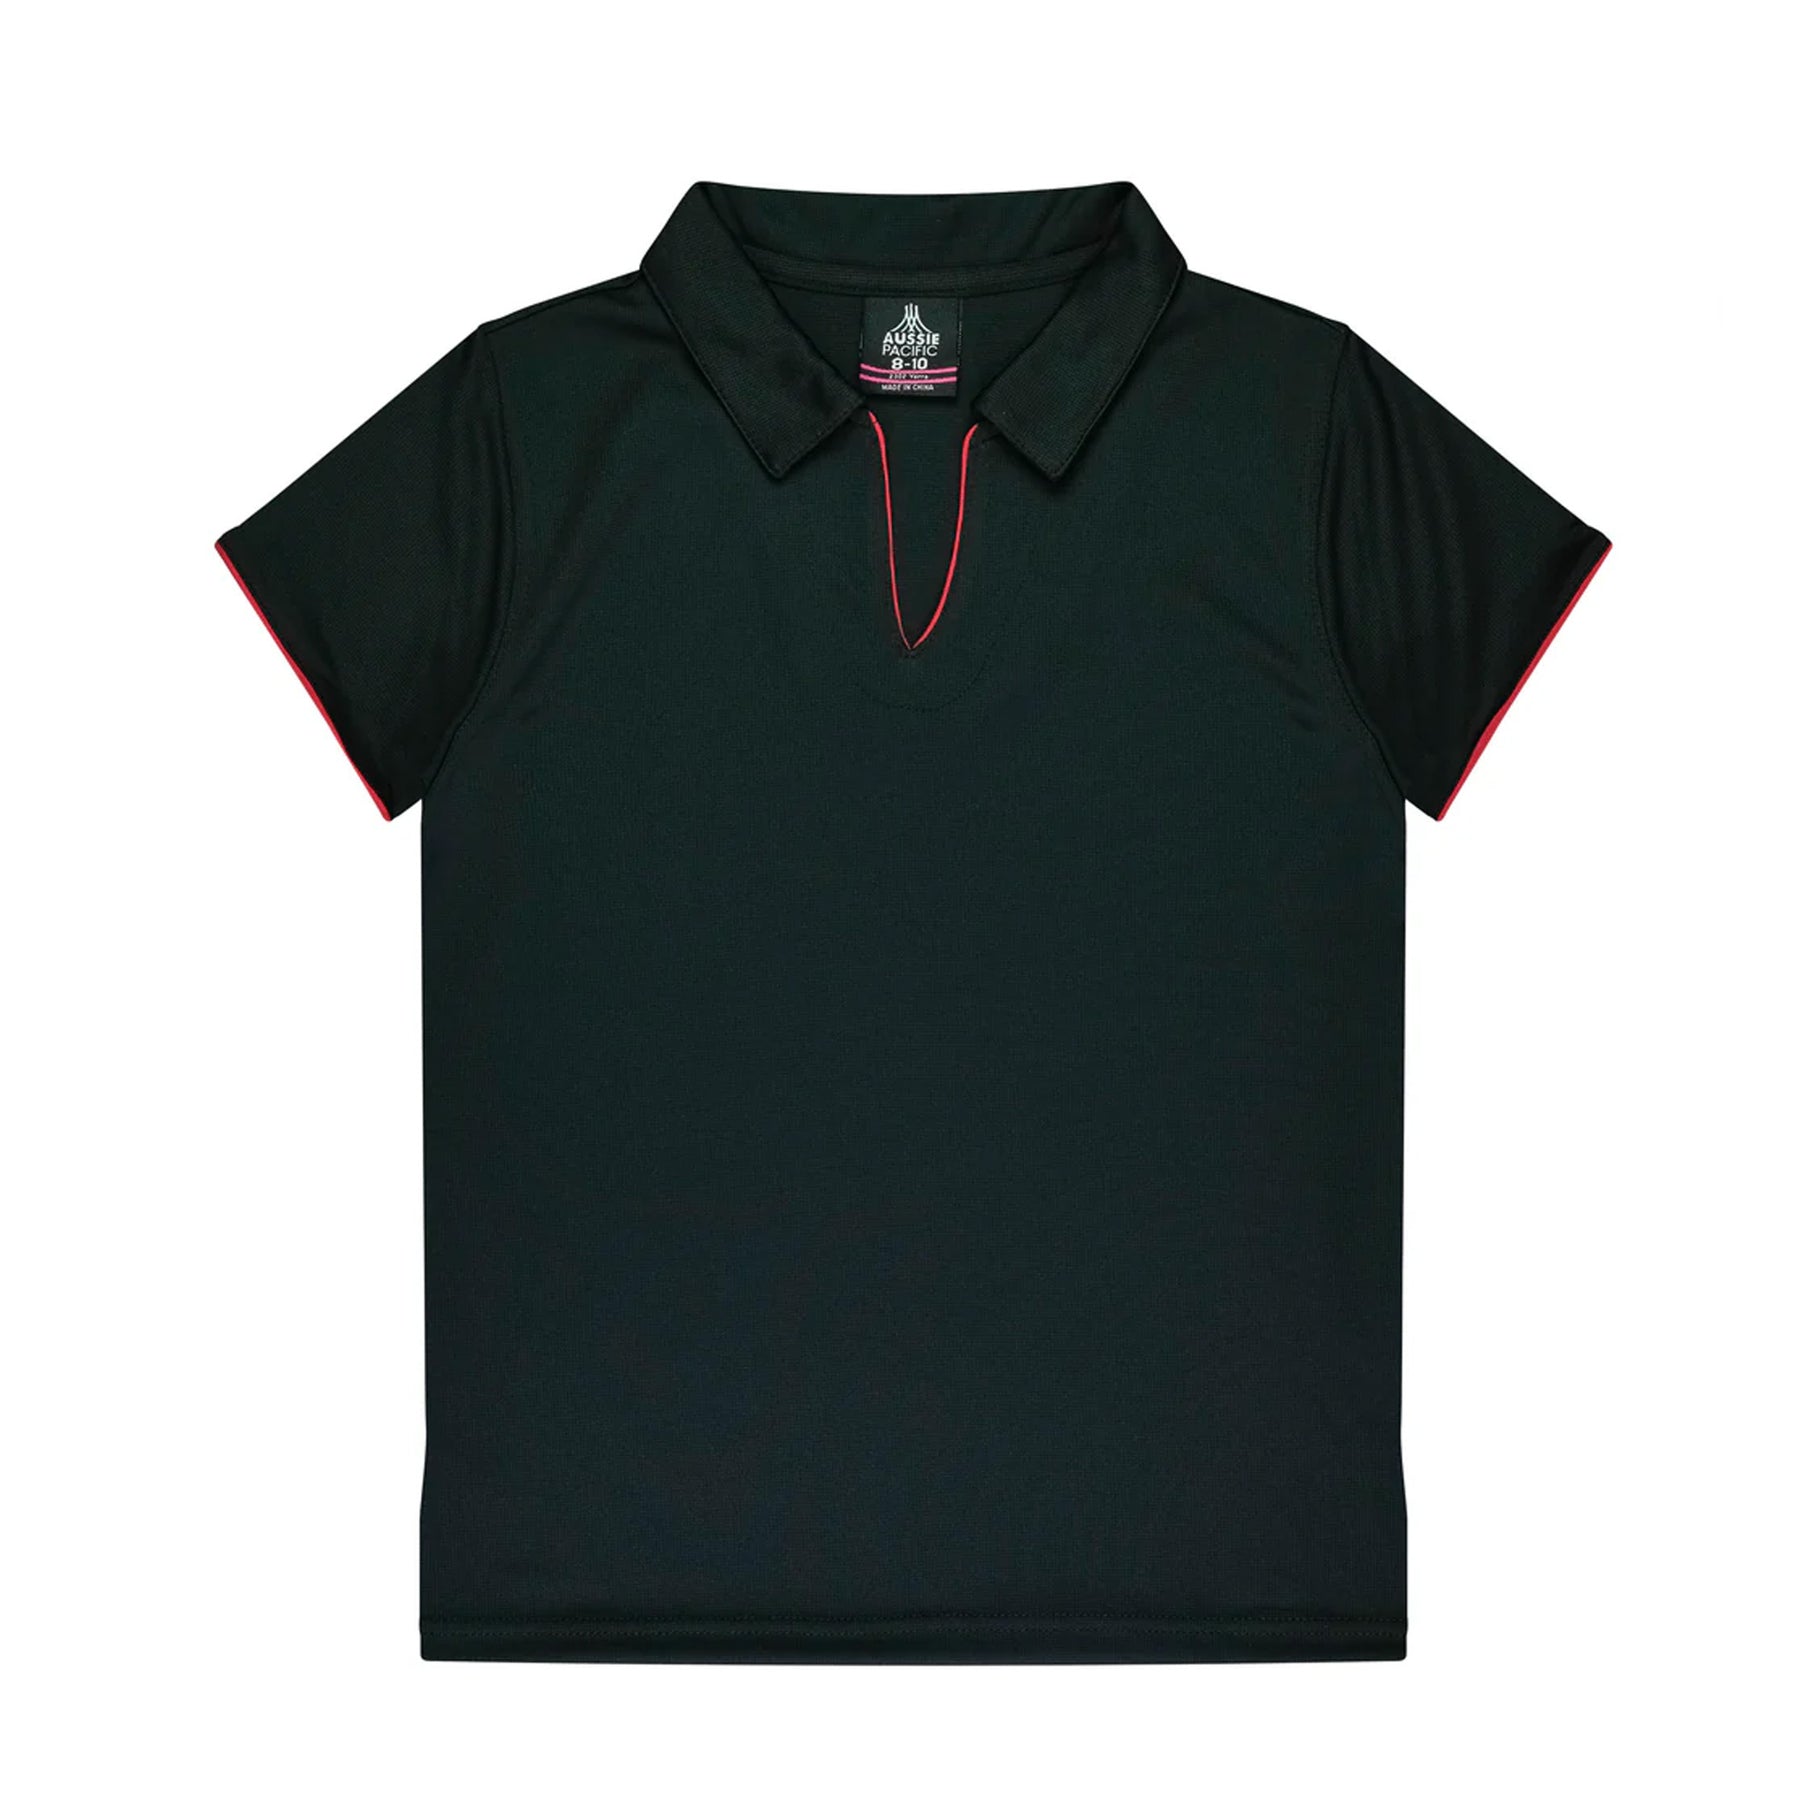 aussie pacific yarra ladies polo in black red